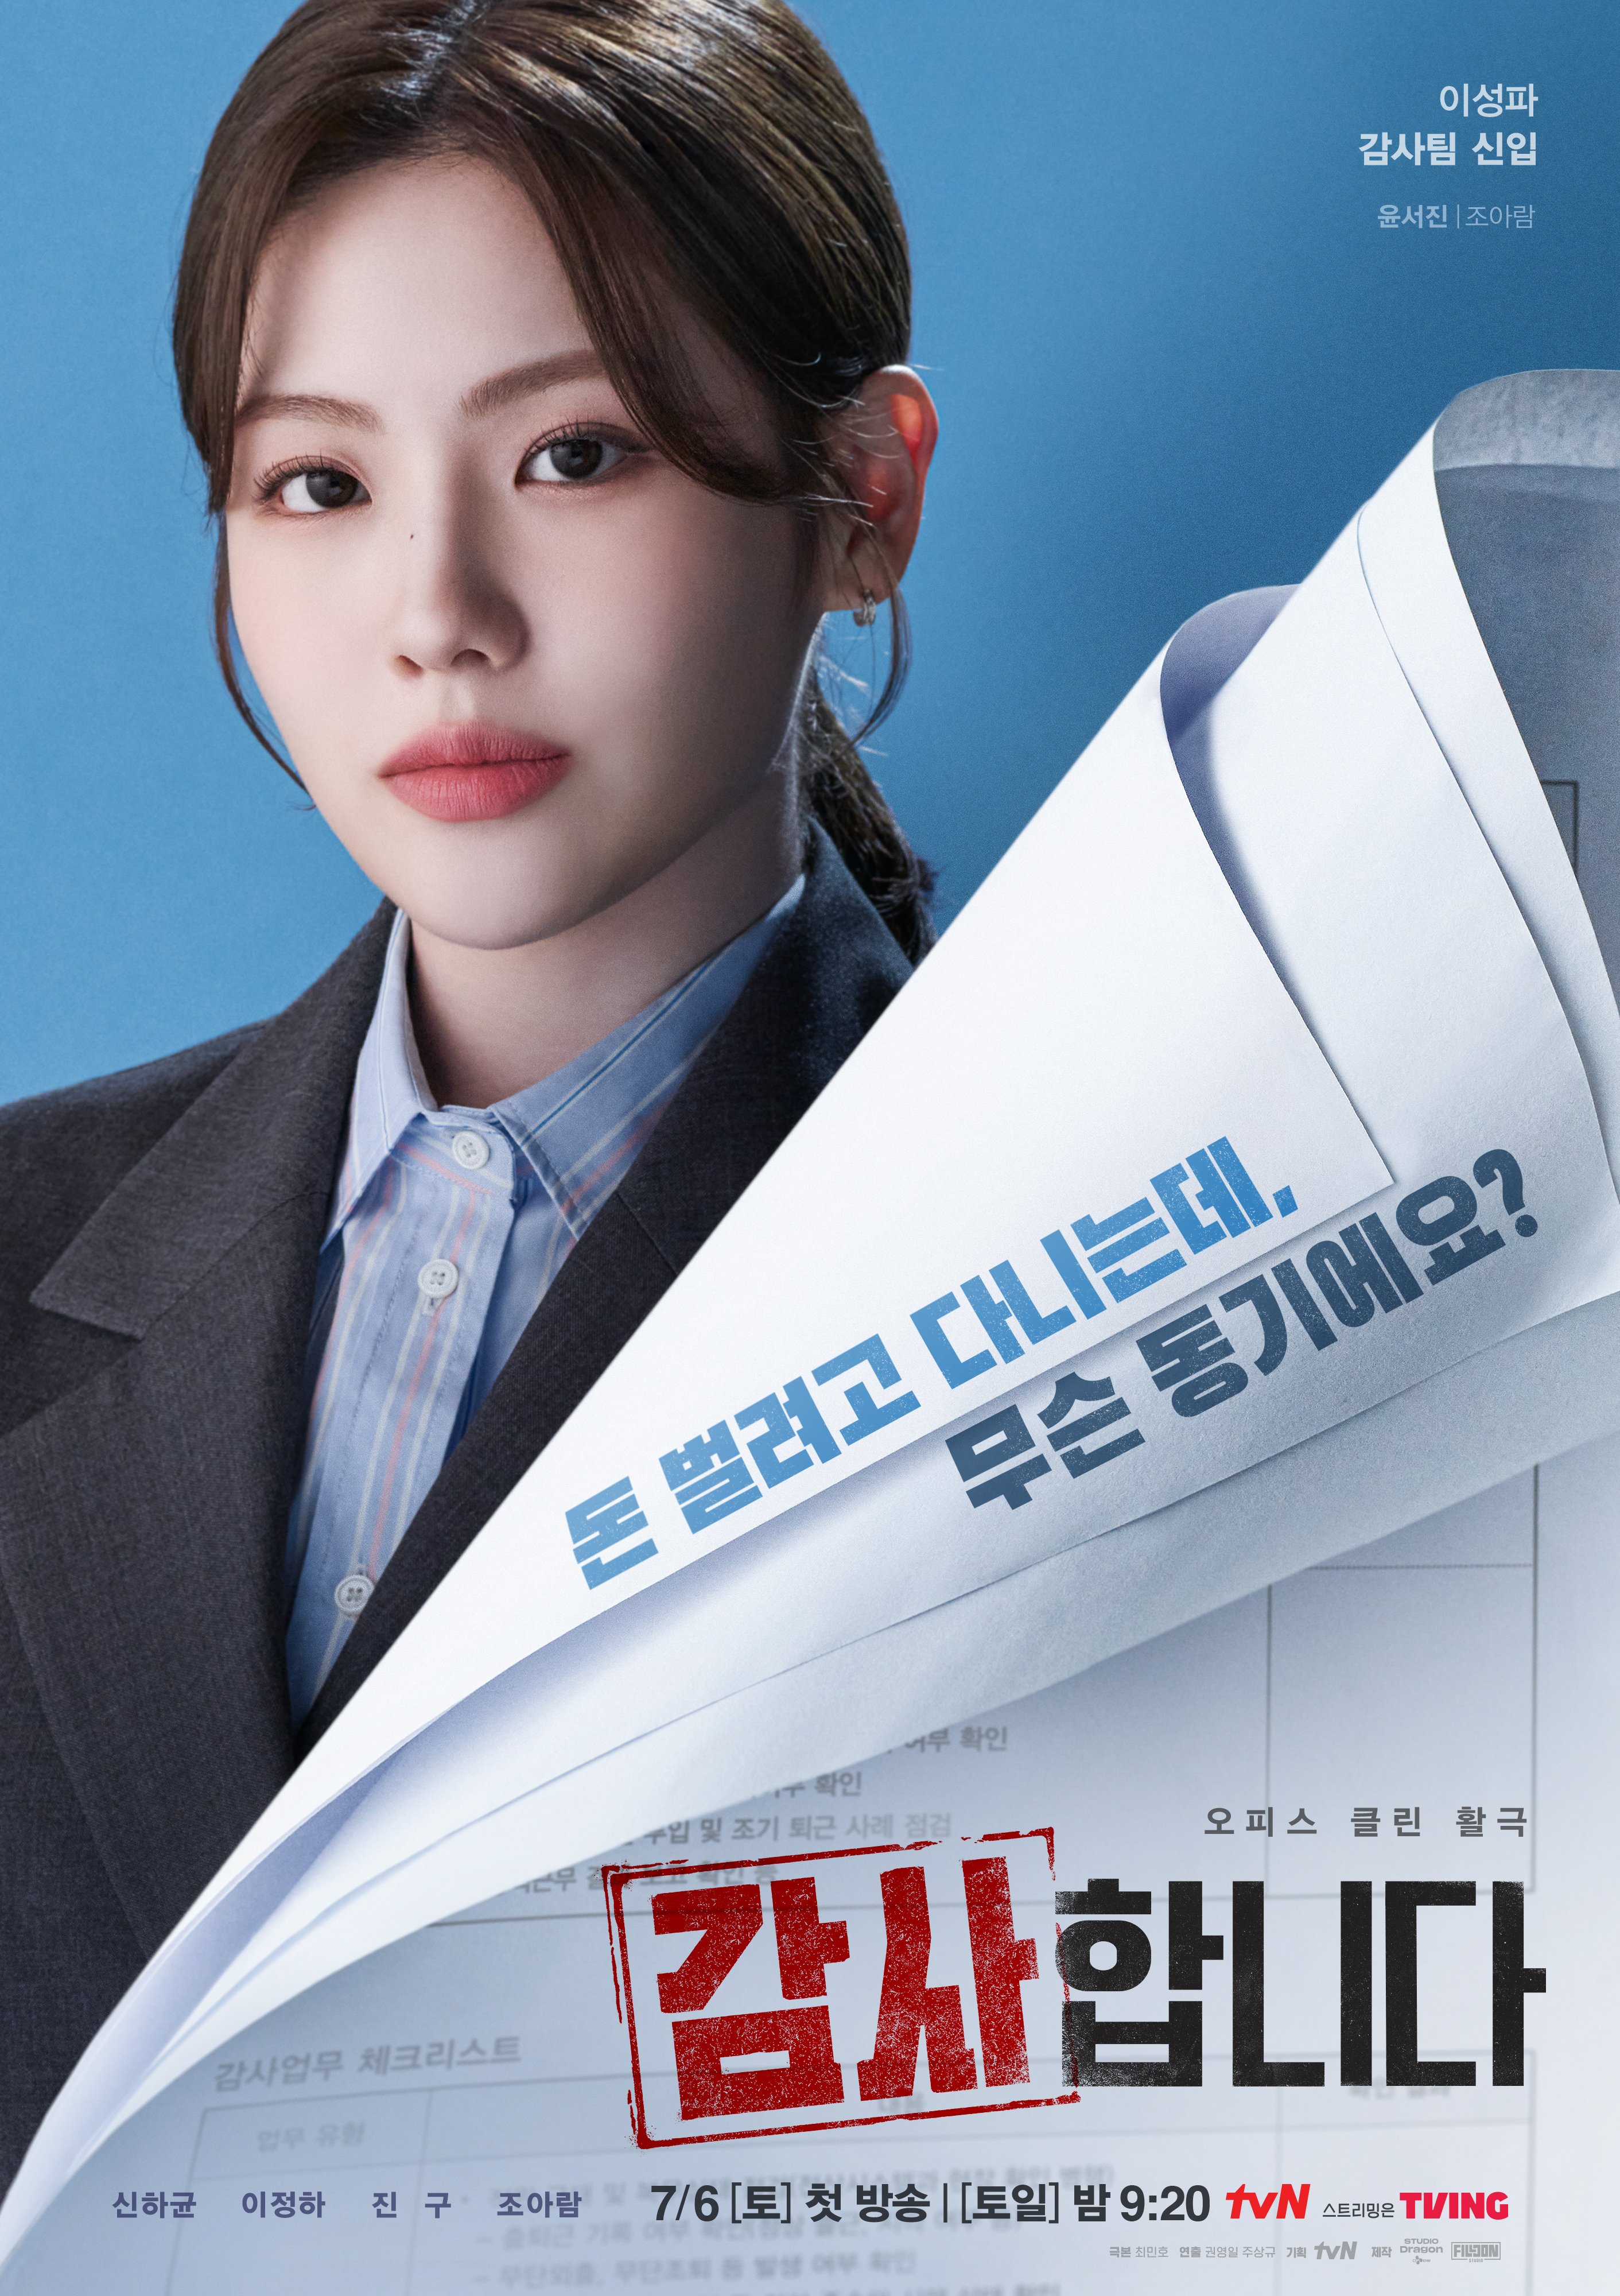 Shin Ha Kyun, Lee Jung Ha, Jin Goo, And Jo Ah Ram Are Full Of Ambition In Posters For 